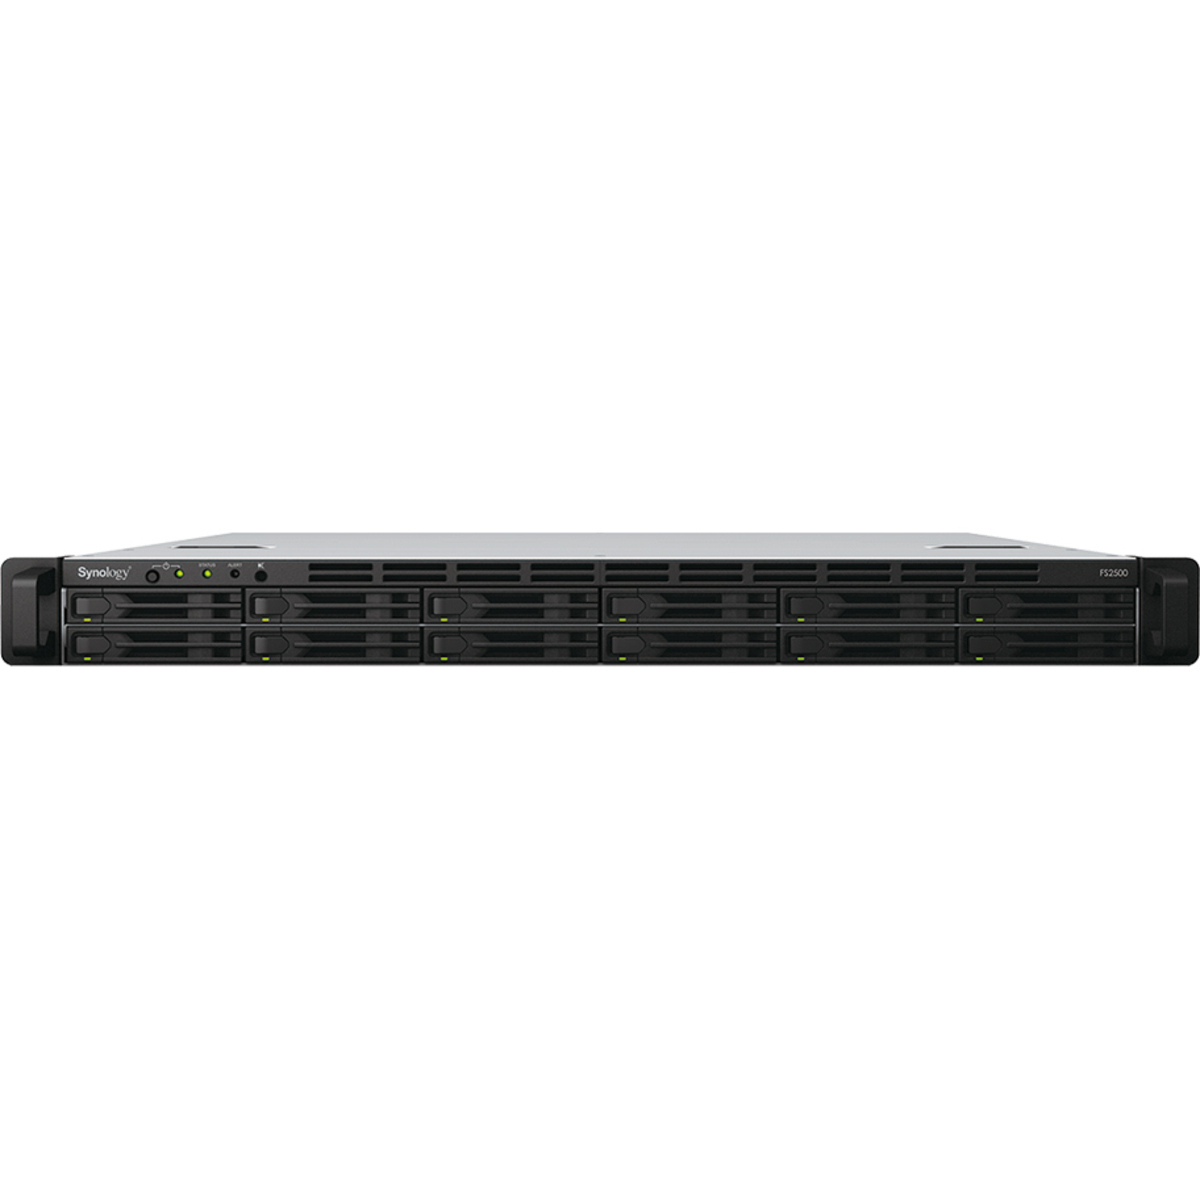 Synology FlashStation FS2500 96tb 12-Bay RackMount Large Business / Enterprise NAS - Network Attached Storage Device 12x8tb Samsung 870 QVO MZ-77Q8T0 2.5 560/530MB/s SATA 6Gb/s SSD CONSUMER Class Drives Installed - Burn-In Tested - FREE RAM UPGRADE FlashStation FS2500